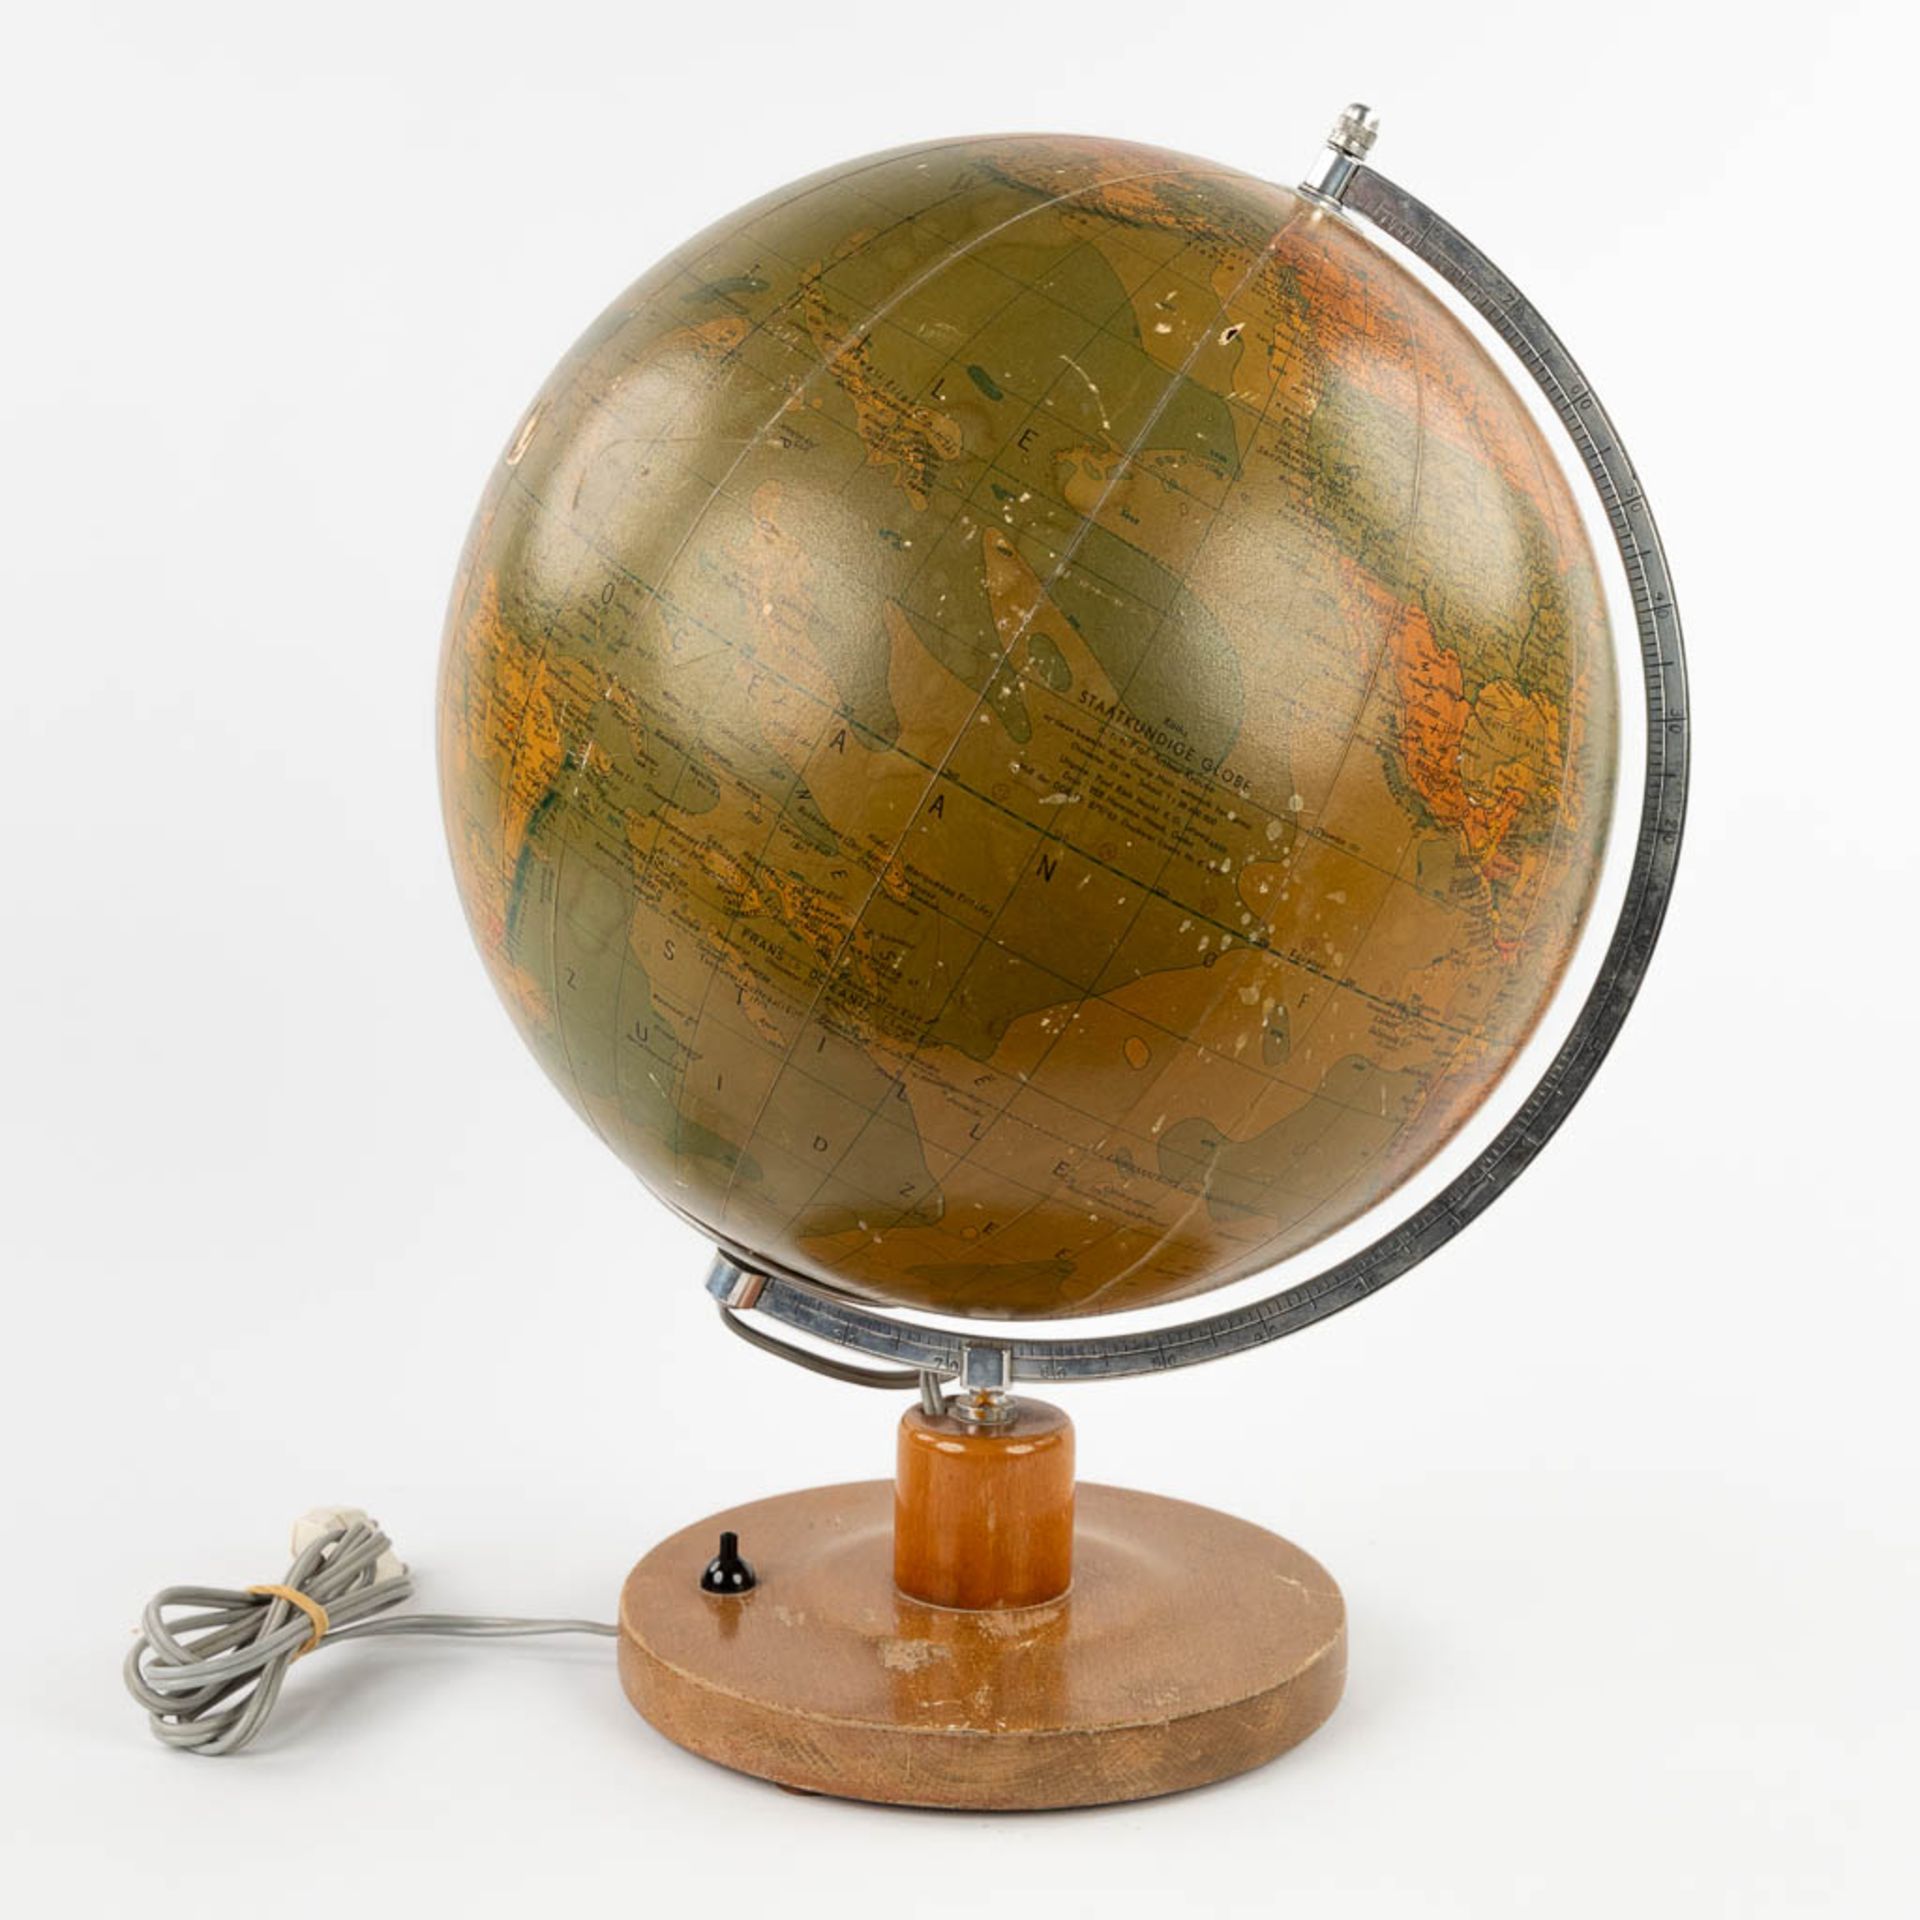 A mid-century globe on a wood base, with illumination. Glass, Circa 1960. (H:46 x D:33 cm) - Image 5 of 16